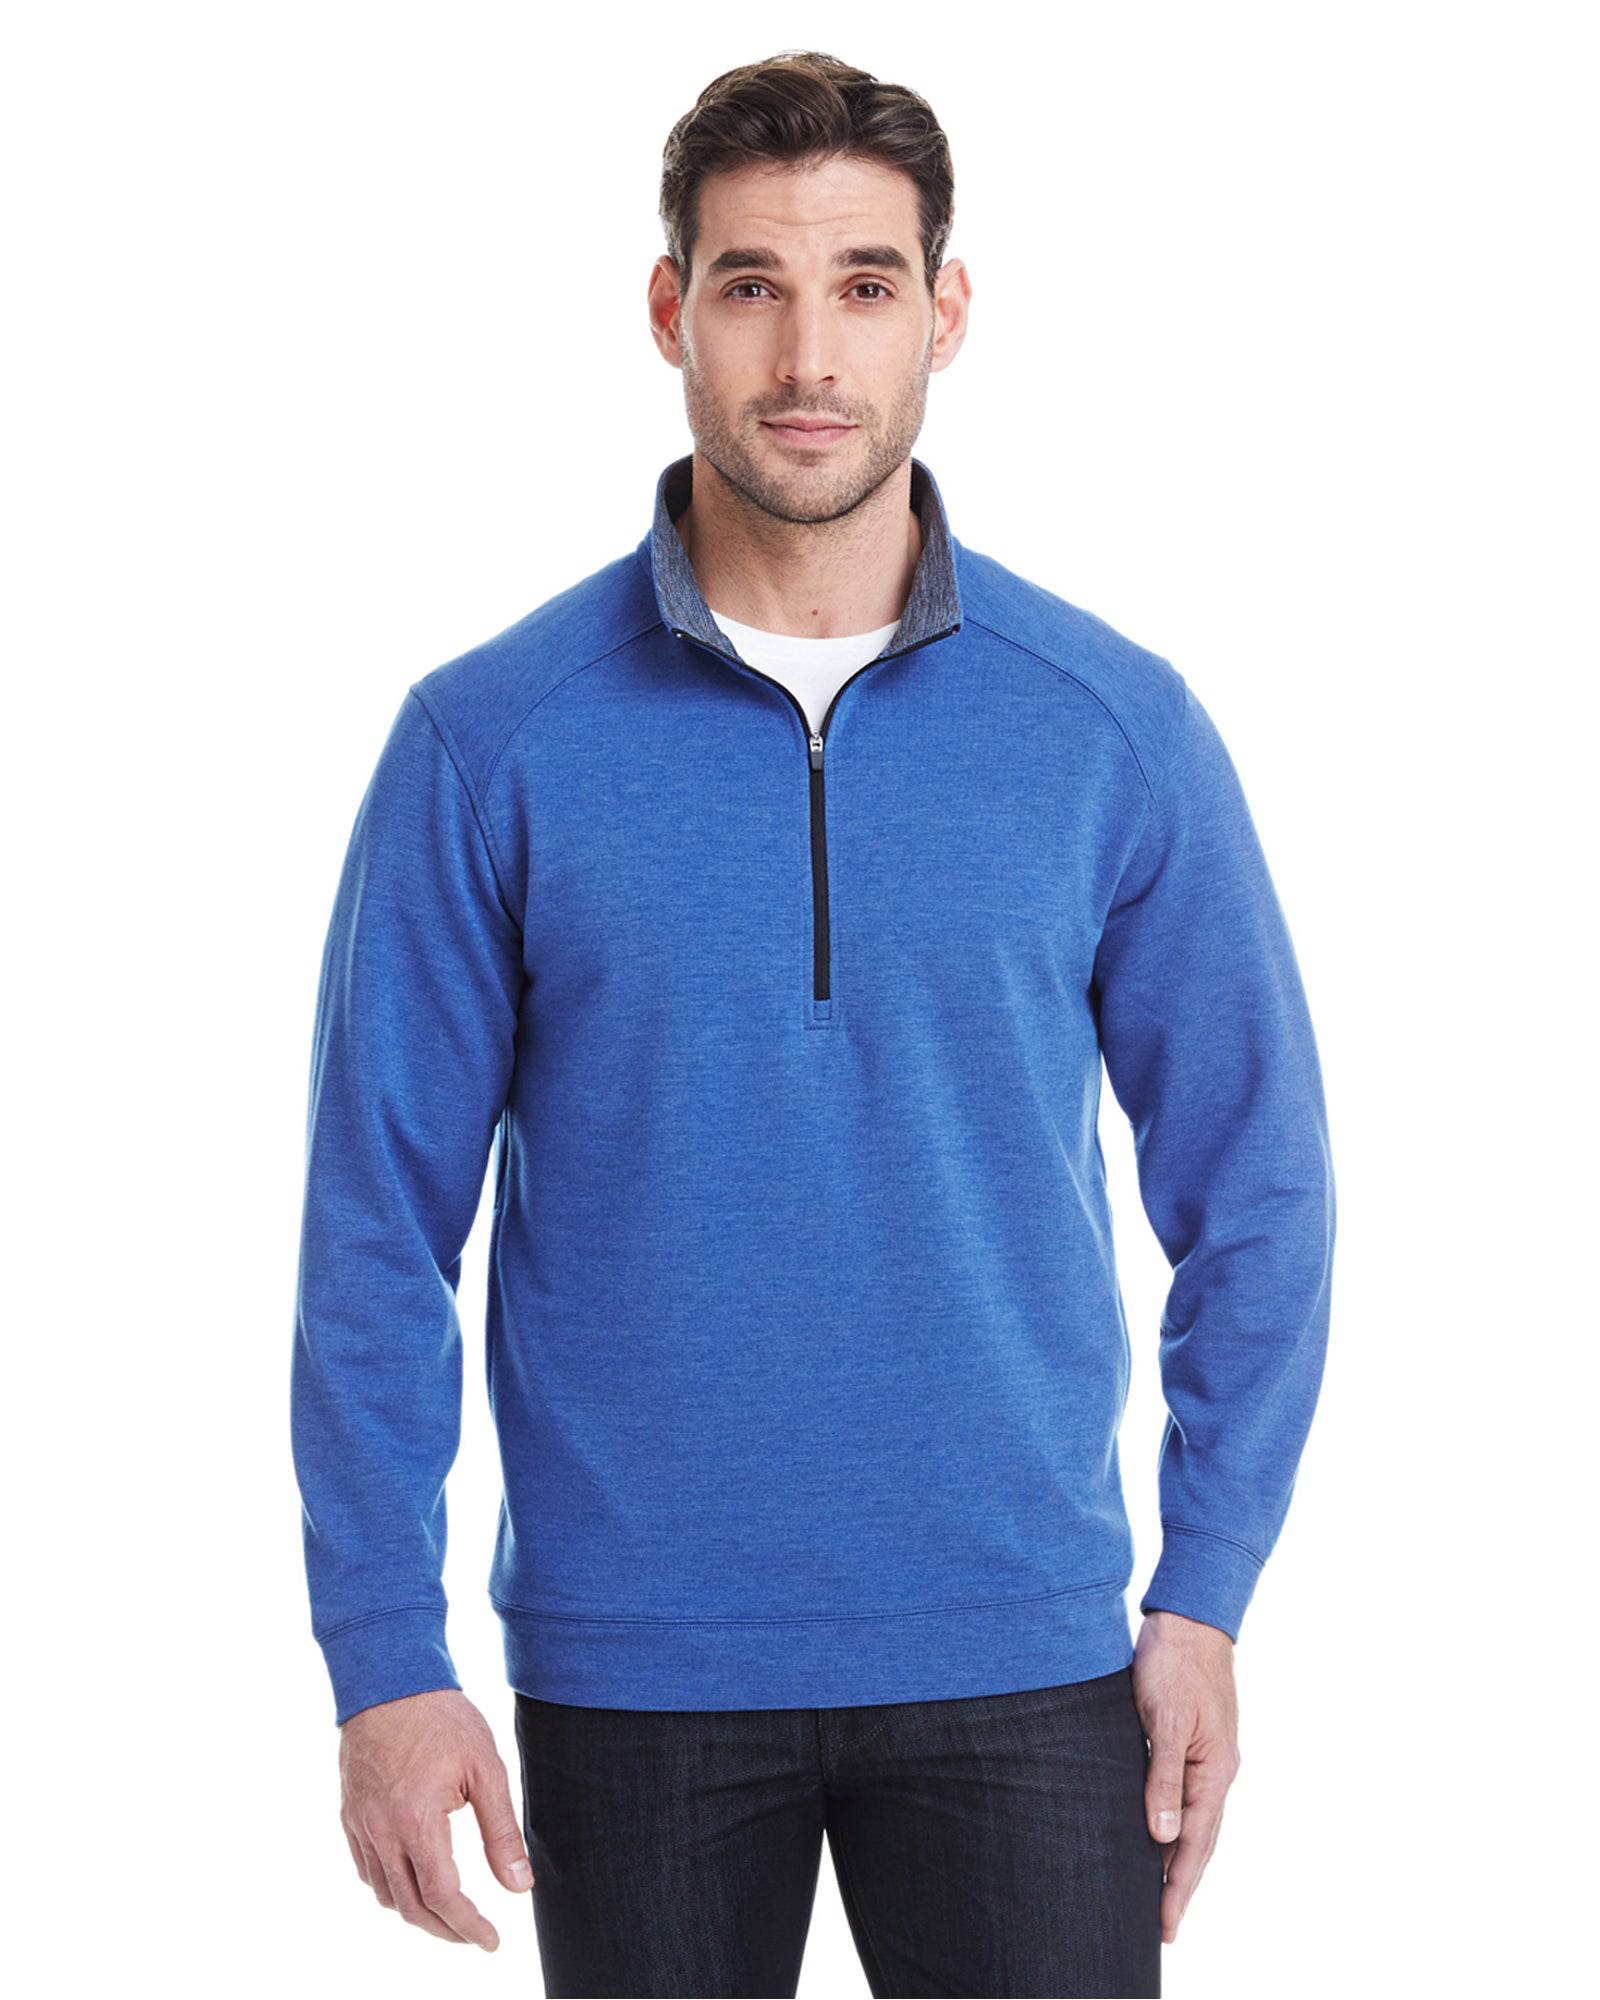 1/4 Zip Pullover in French Blue Heather Tech Stretch - Rainwater's Men's Clothing and Tuxedo Rental